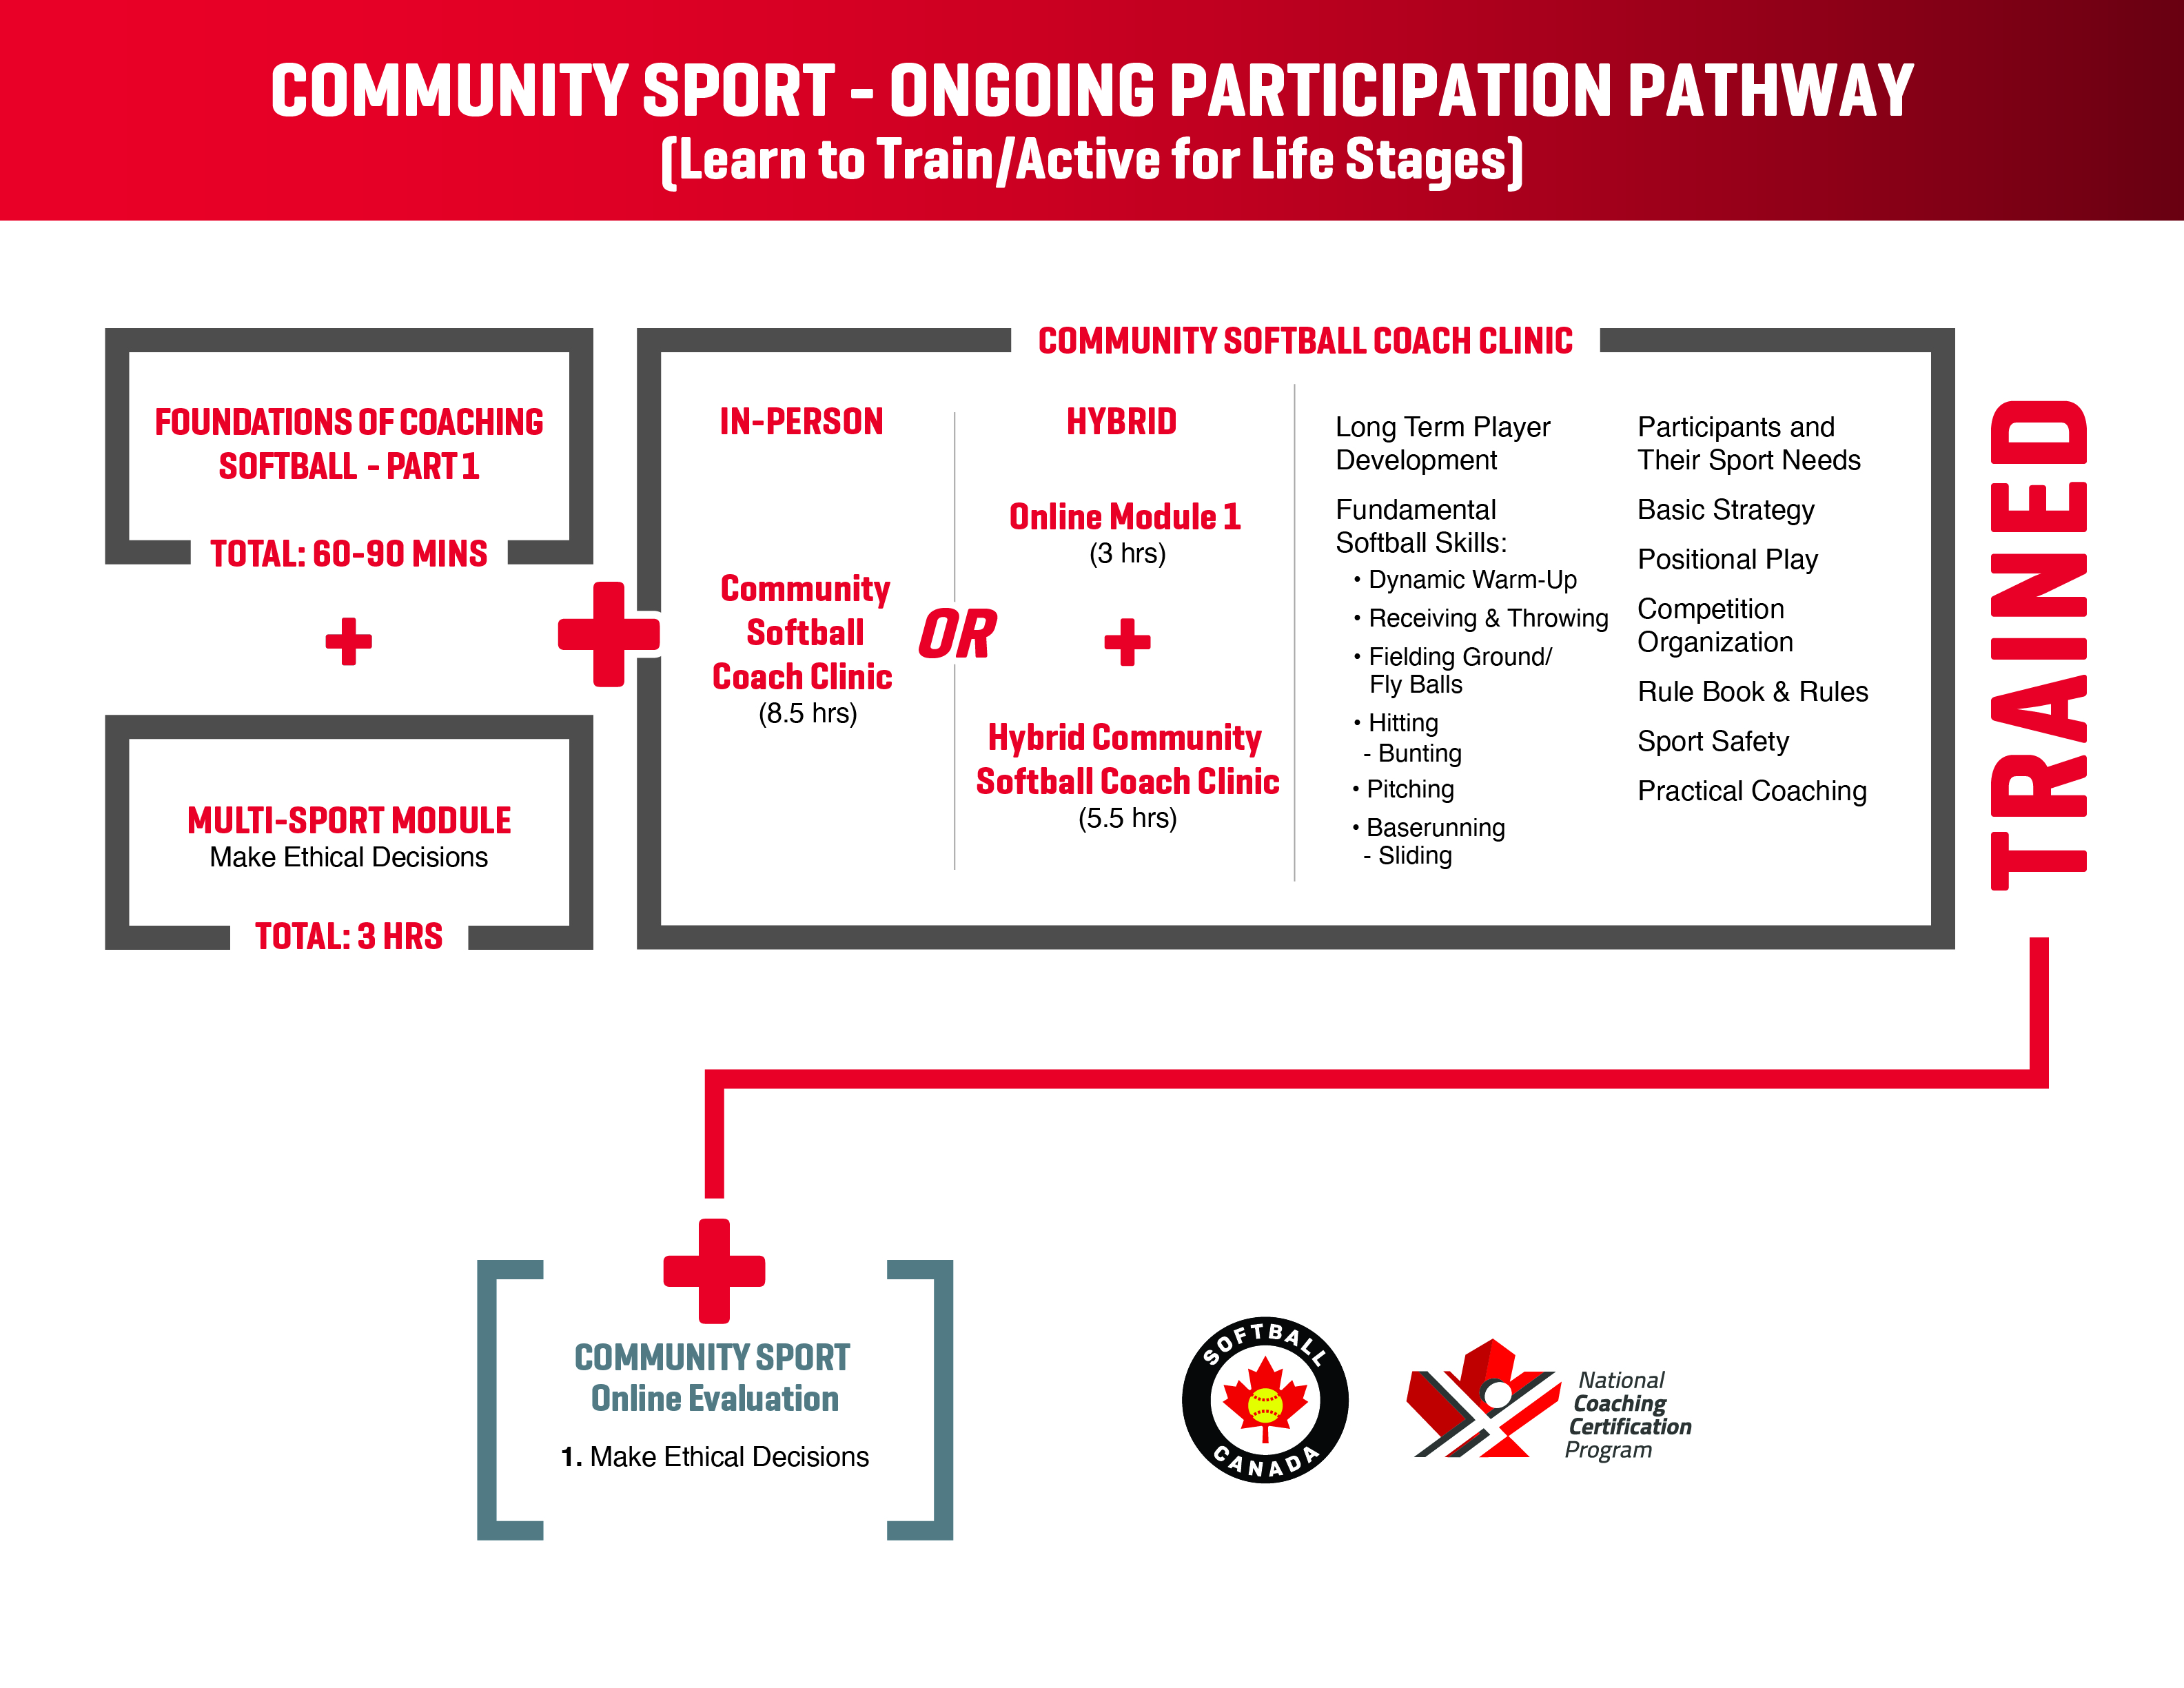 Community Sport - Ongoing